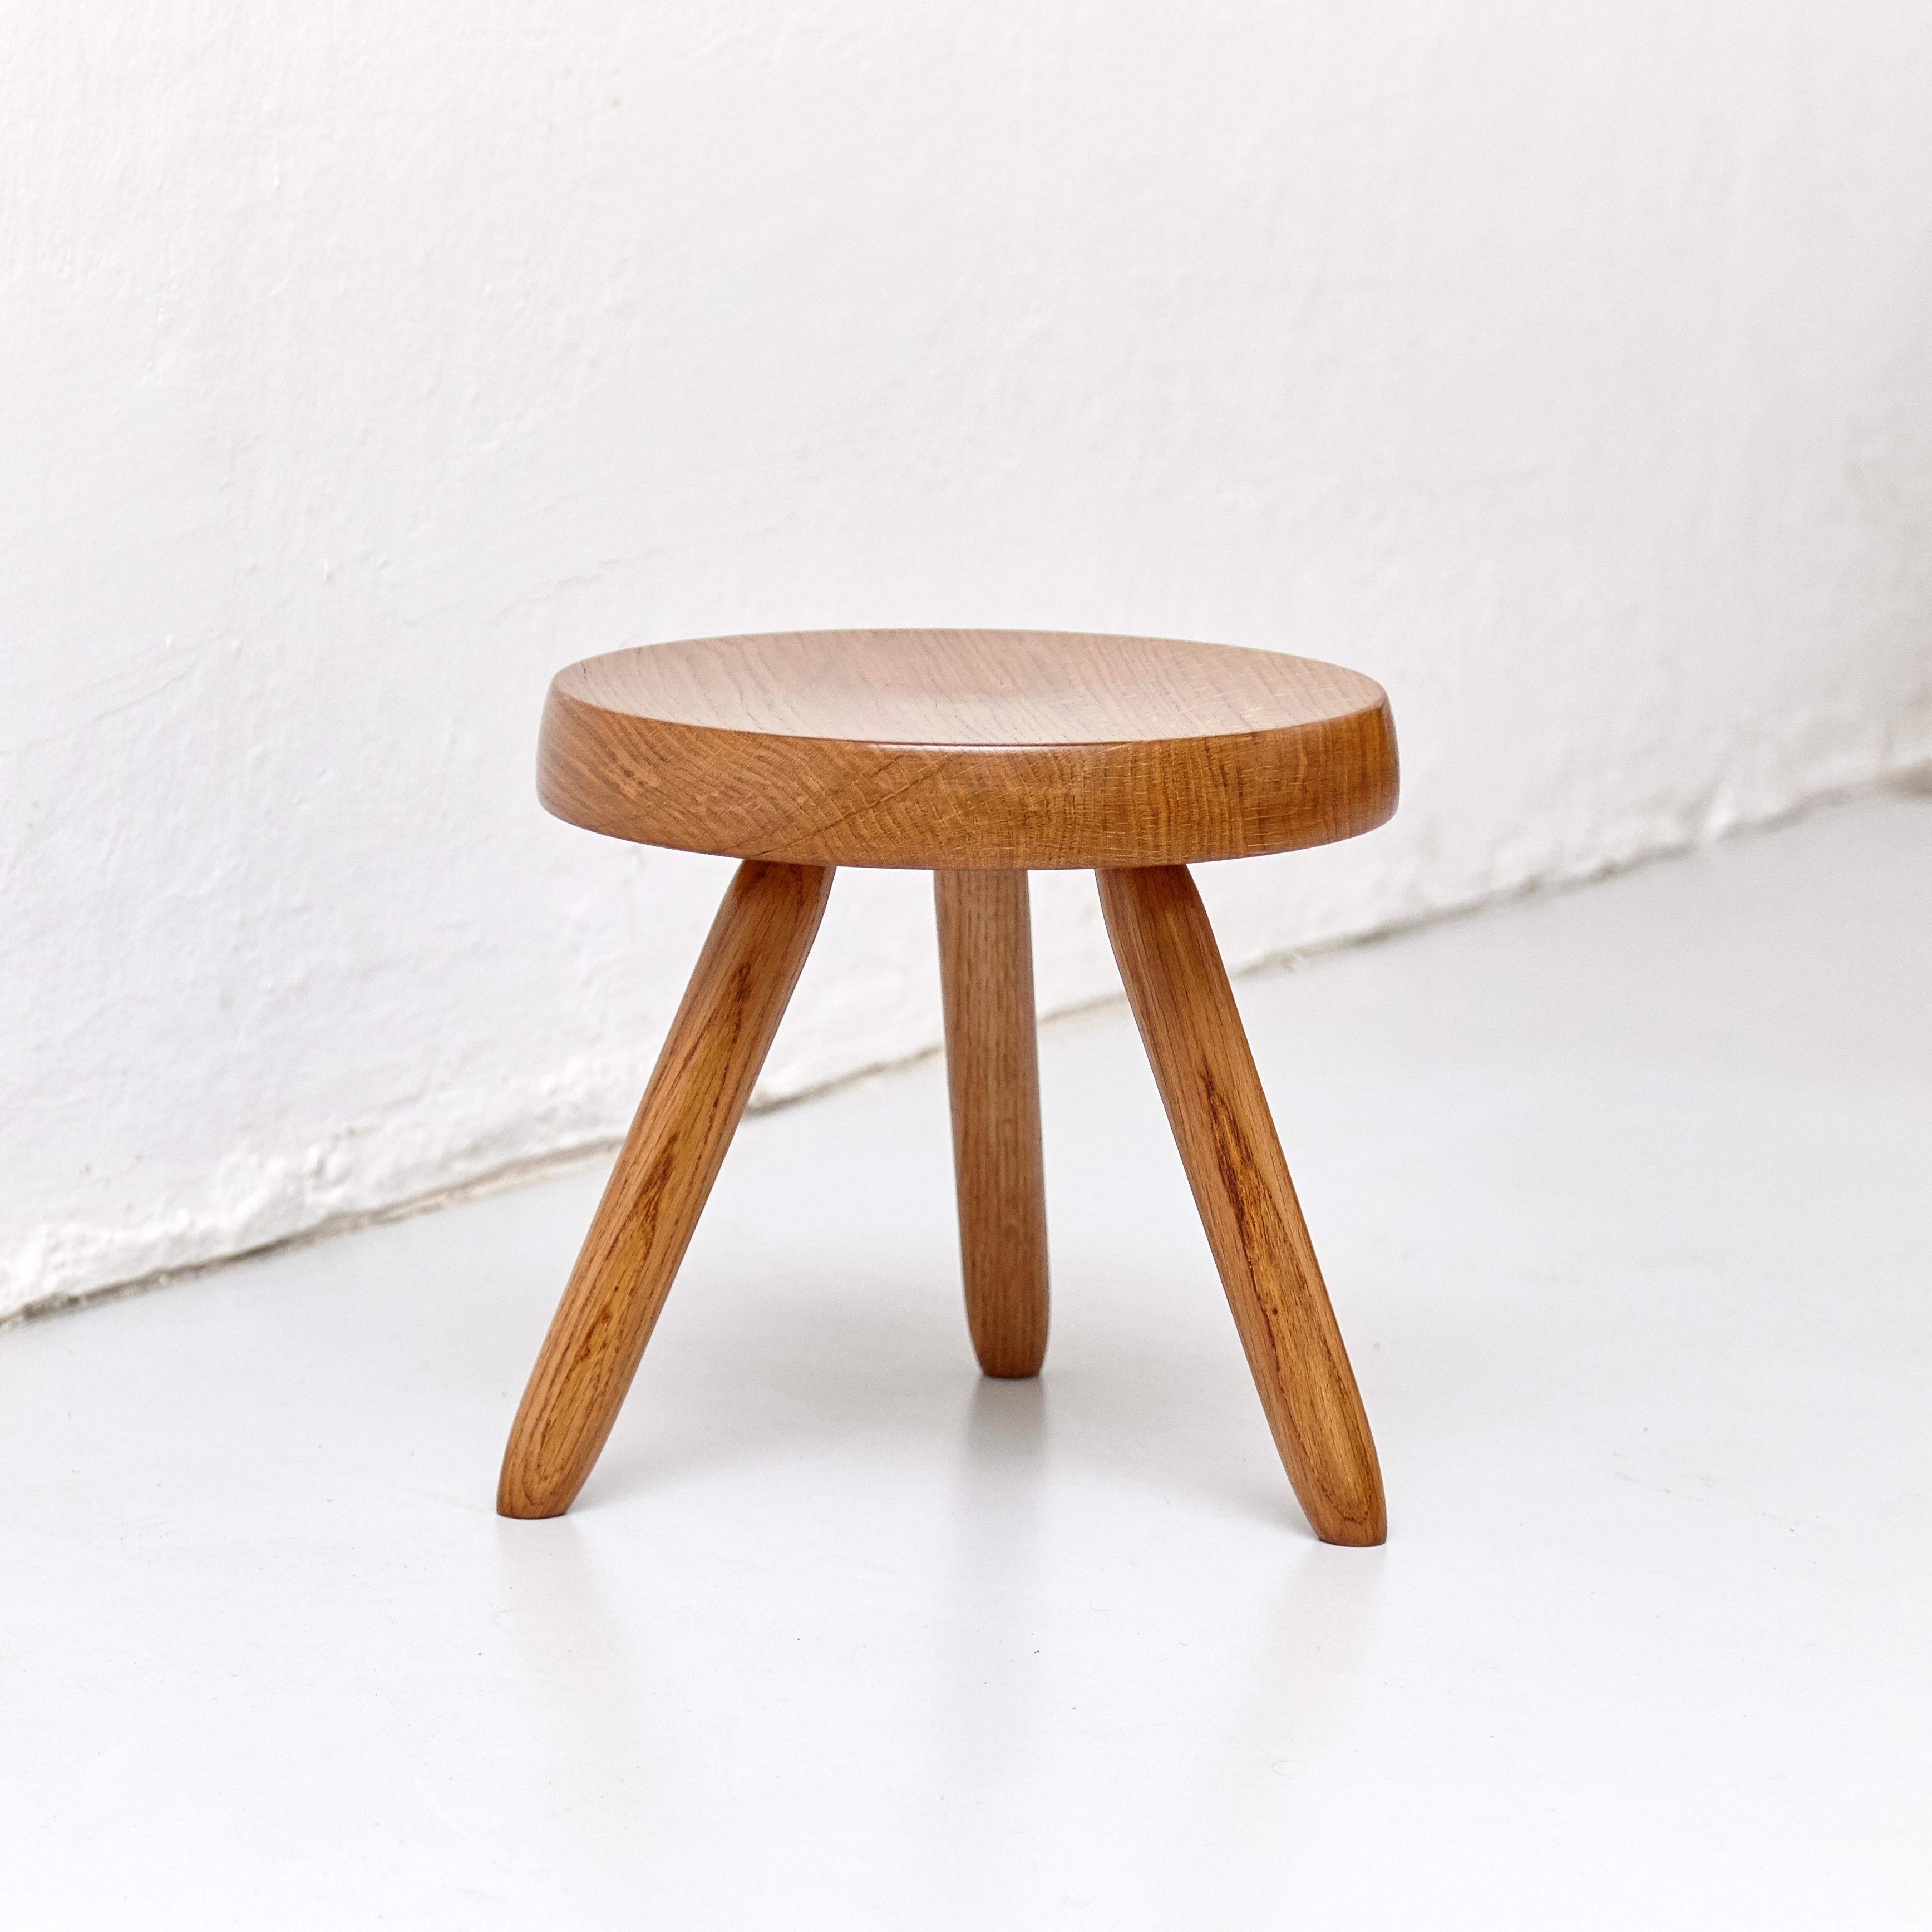 French After Charlotte Perriand, Mid-Century Modern Wood Stool